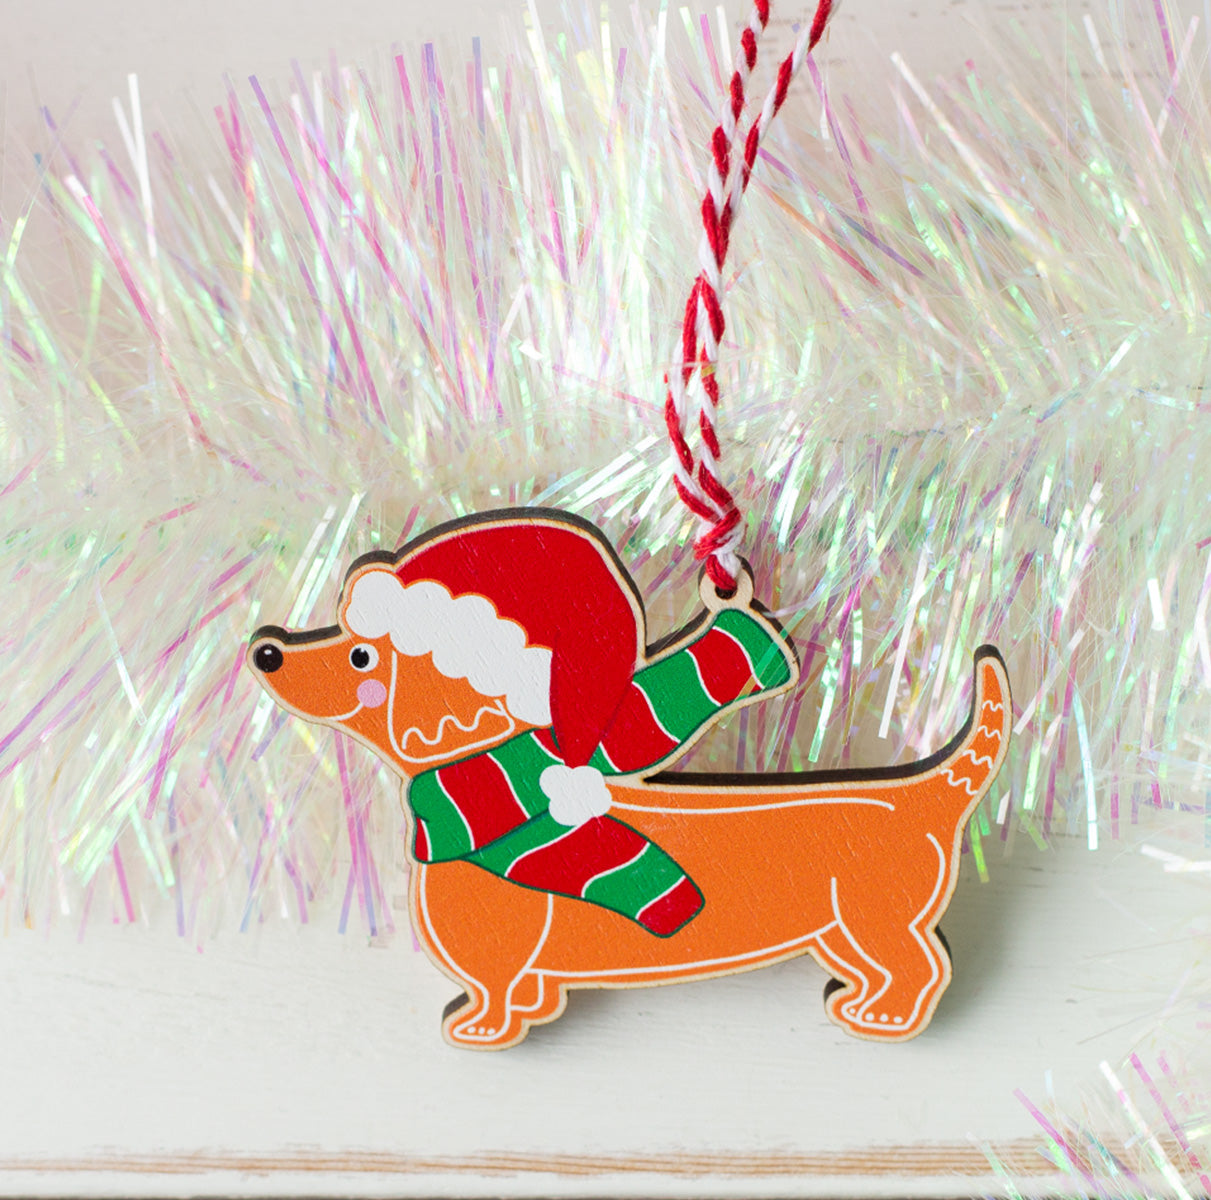 Gingerbread style Dachshund Christmas tree decoration with red and white twine for hanging.